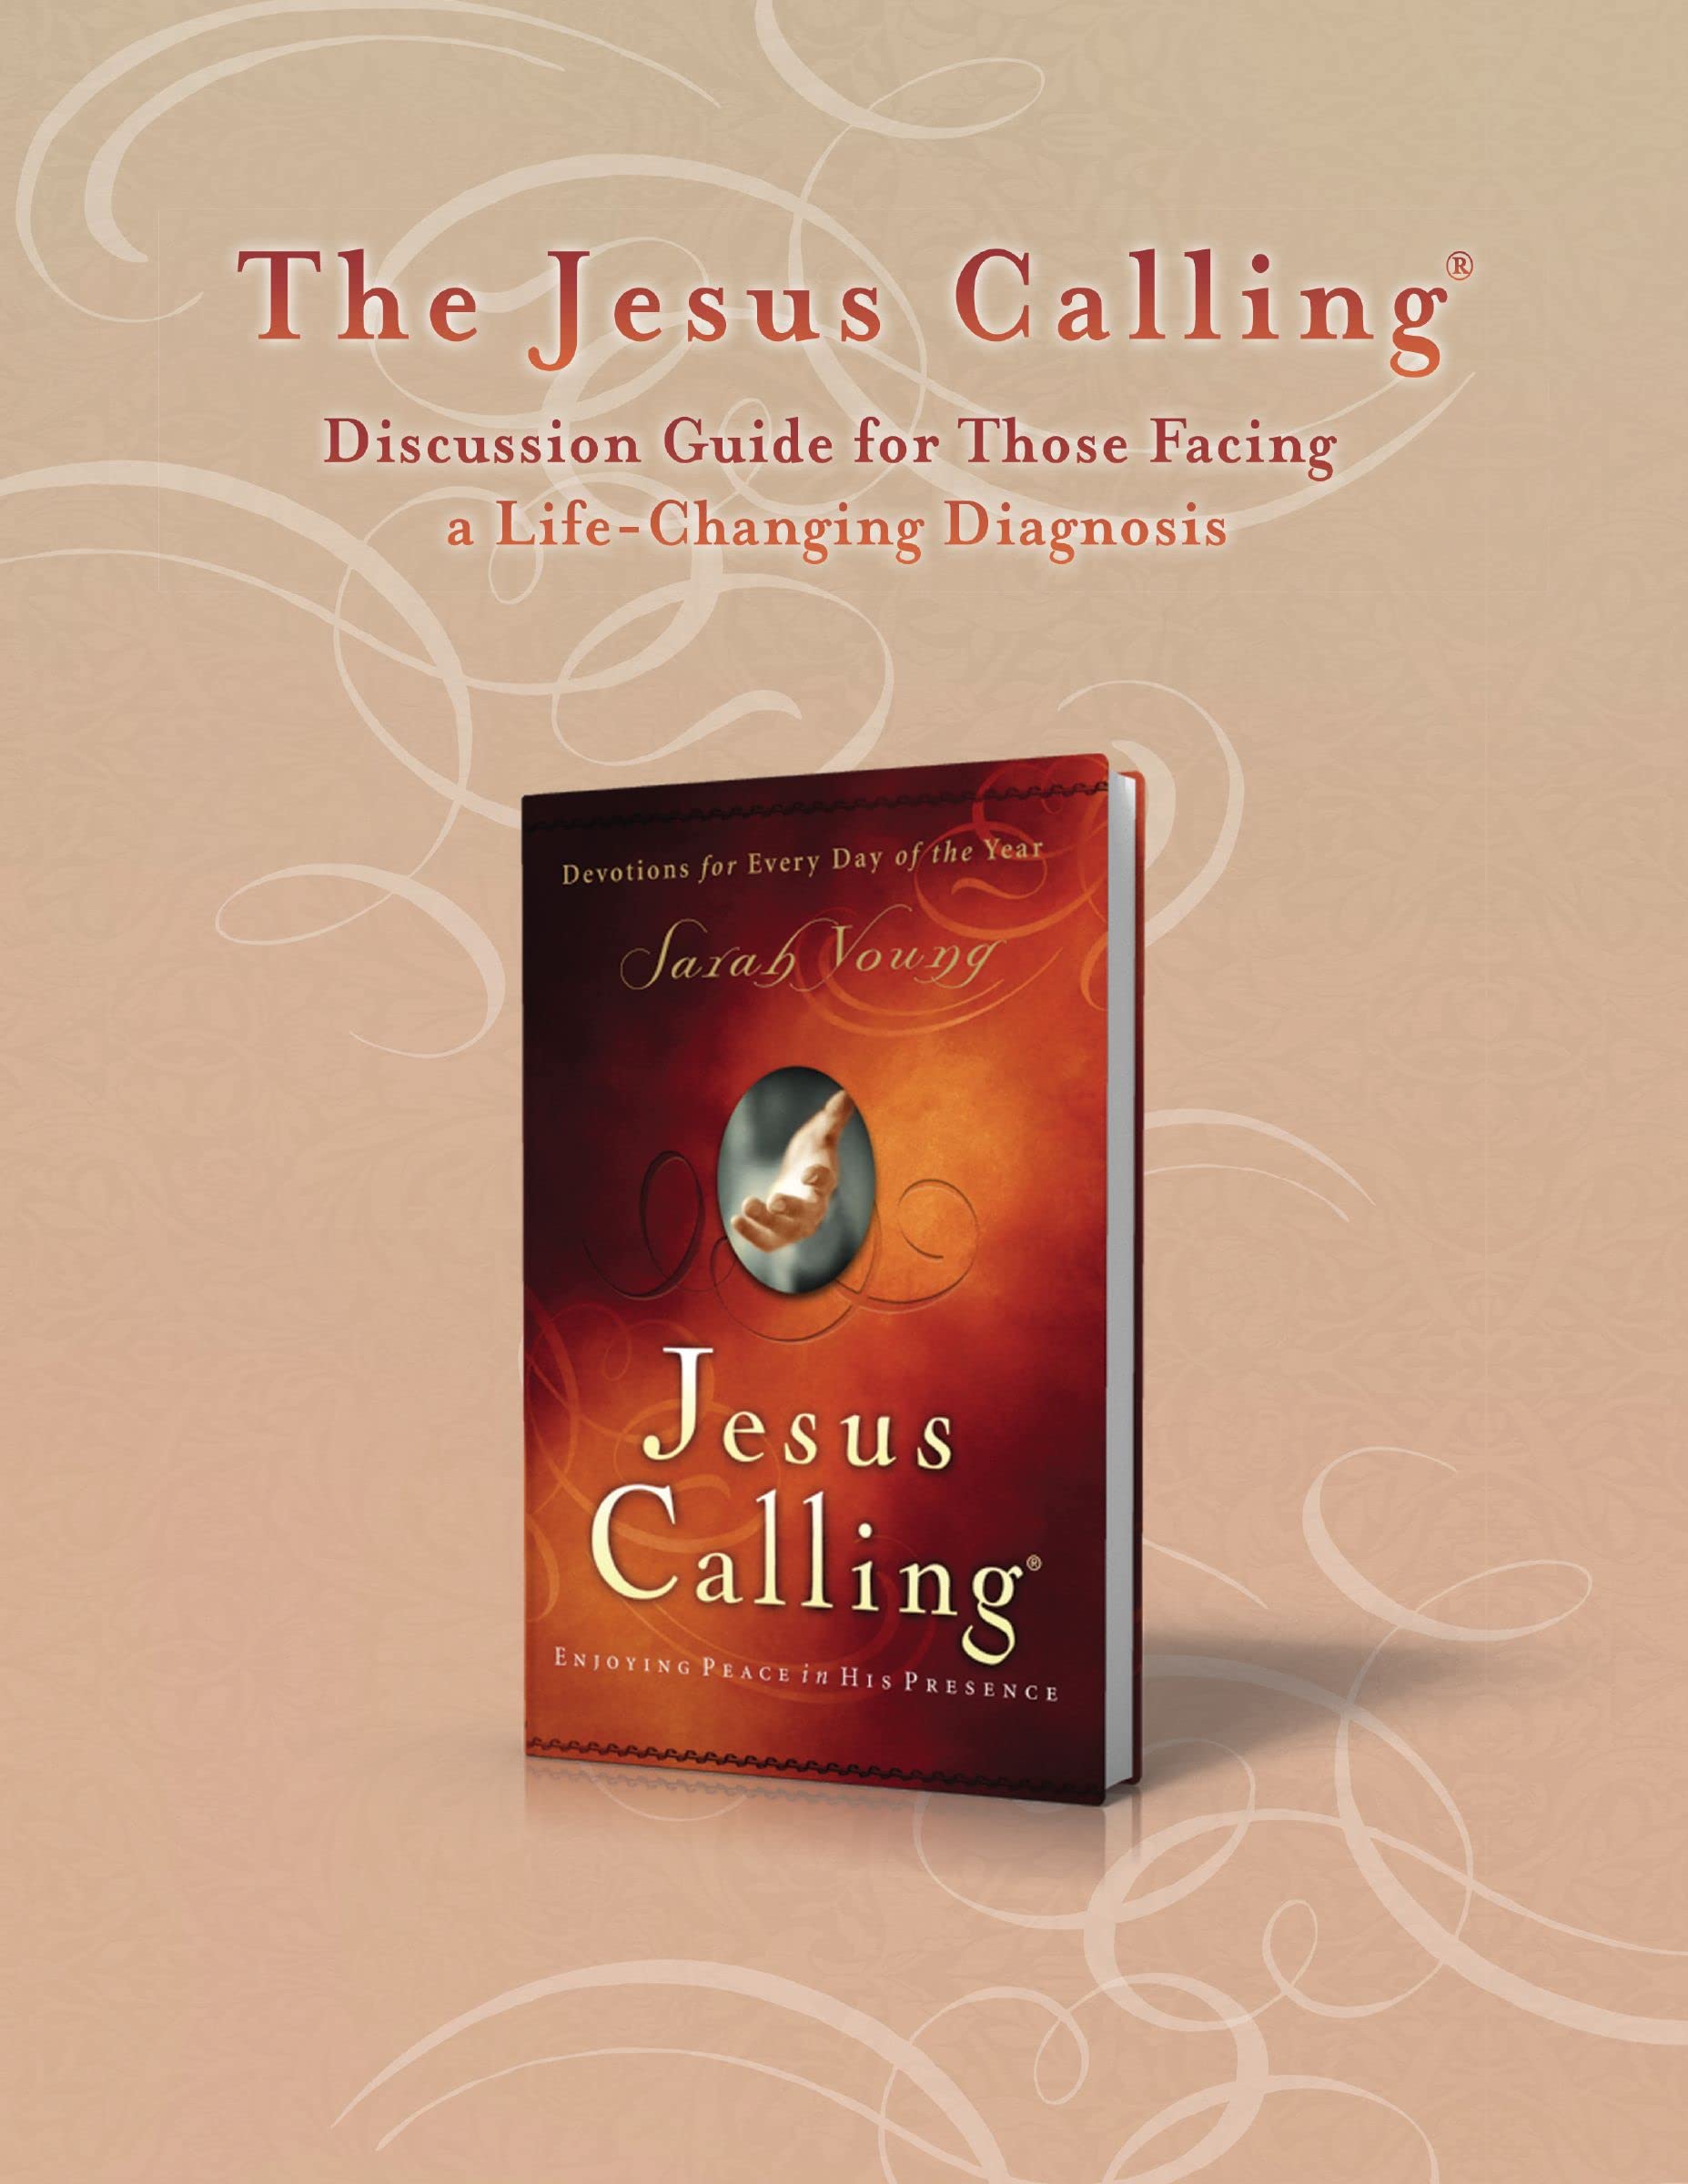 The Jesus Calling Discussion Guide for Those Facing a Life-Changing Diagnosis (Jesus Calling®)